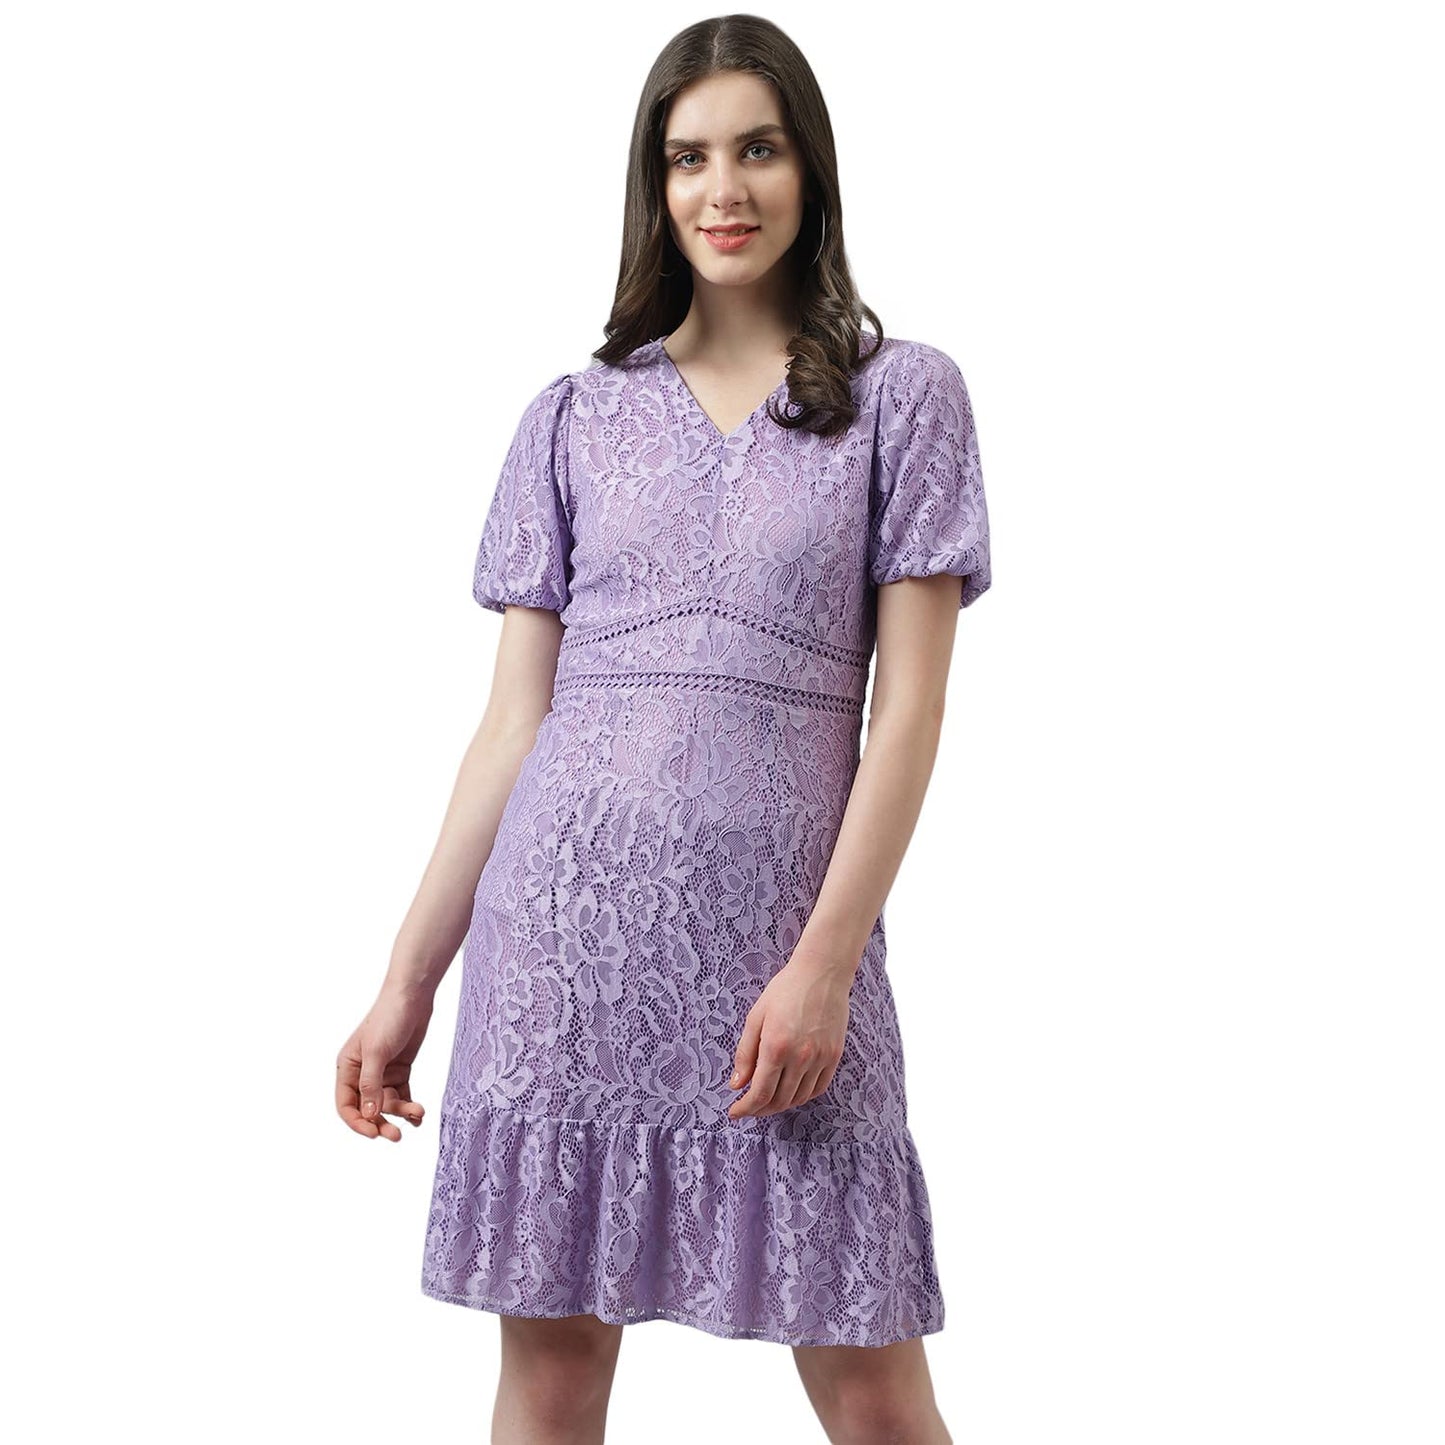 Latin Quarters Women's Lilac Self Design Lace Ruffle Dress with Puffer Sleeves